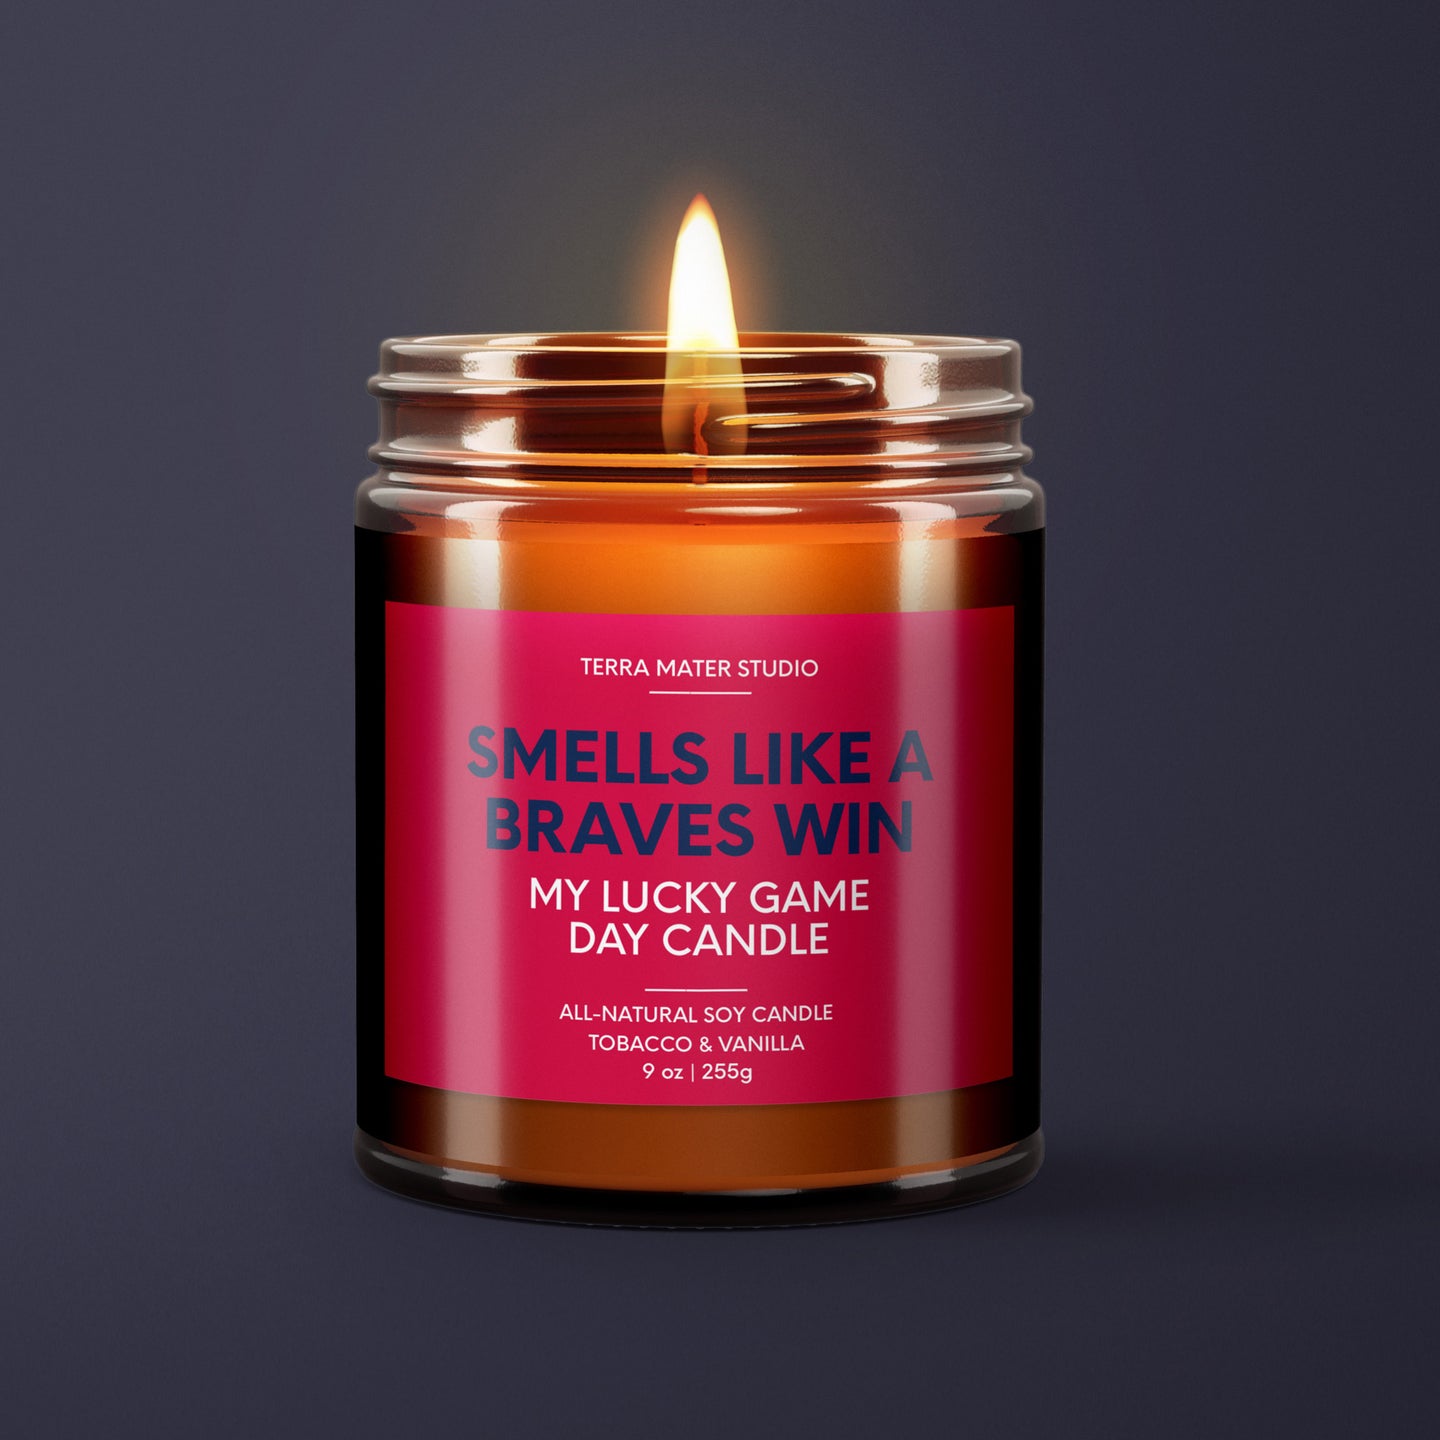 Smells Like A Braves Win | Atlanta Lucky Game Day Candle | Soy Wax Candle